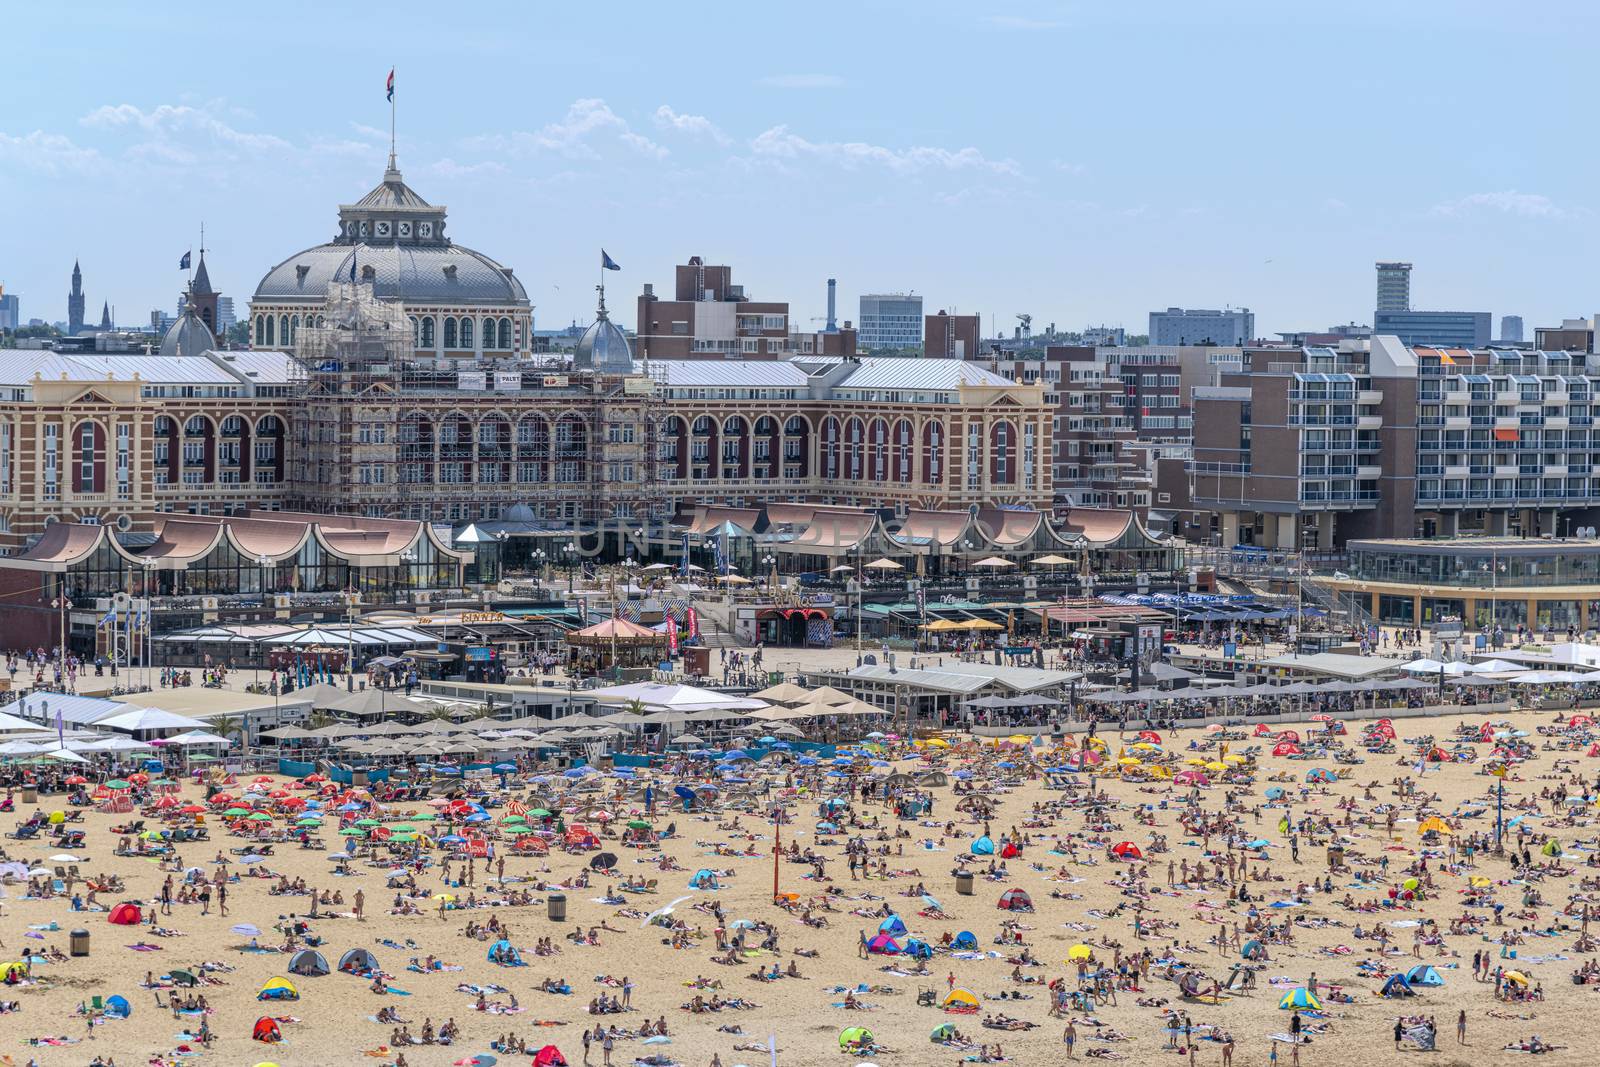 SCHEVENINGEN, 2 June 2019 - Aerial view of the beach of The Hague with crowded people enjoying take sun bath during the hot and sunny day before the summer. by ankorlight